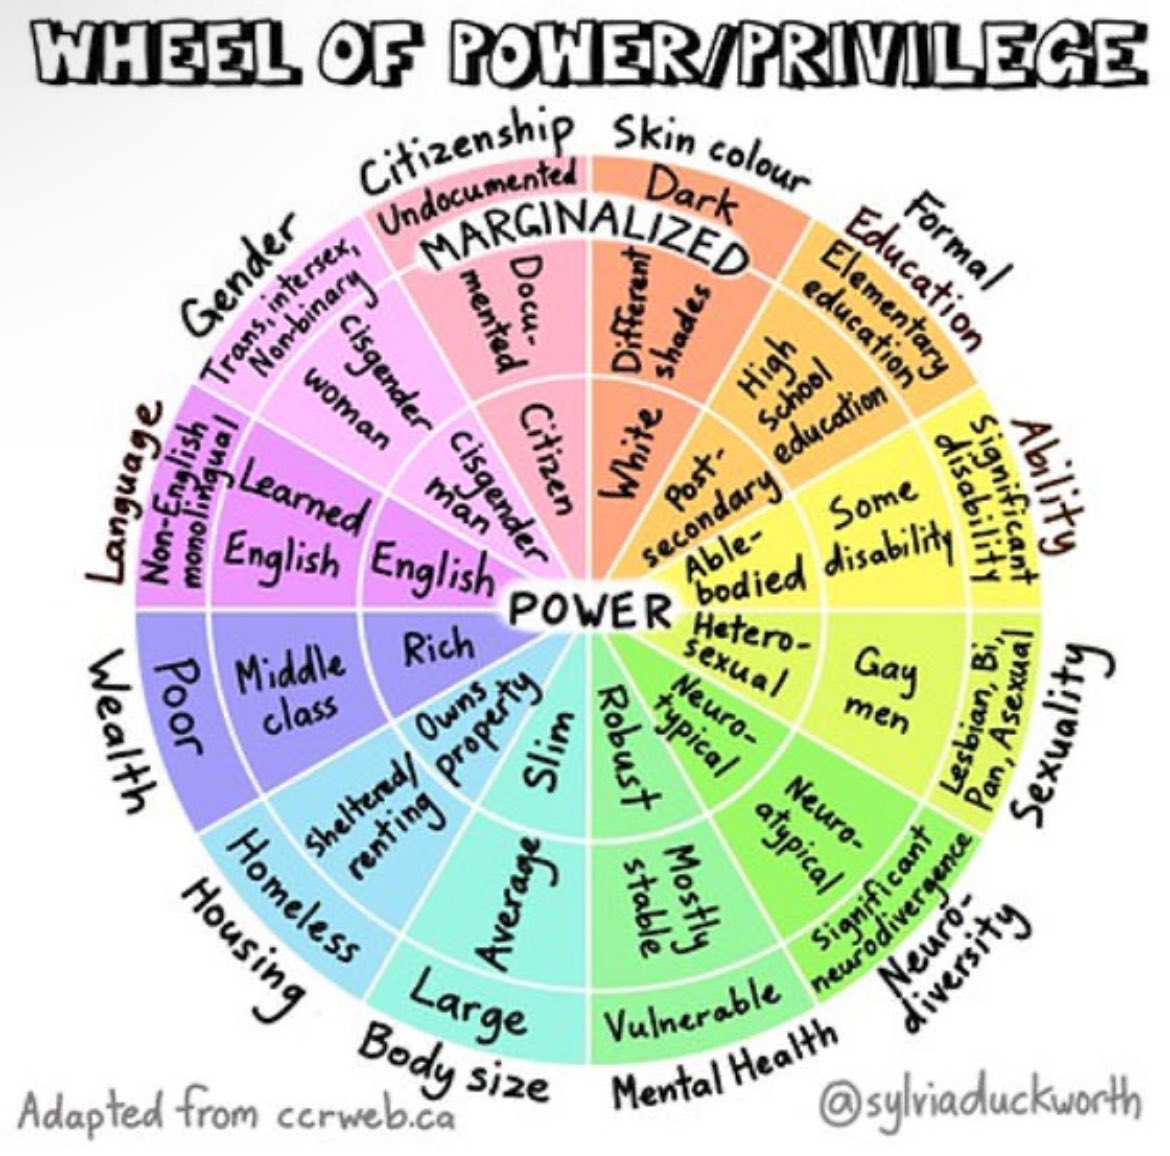 You’ve got to dig deep into the actual lesson plans to root out the bias and hate embedded within #MCPS. Unfortunately, #MCPS, supported by @mceanea, teaches the Wheel of Power & Privilege, the basis for so much of the division amongst our students. Imagine seeing this as a